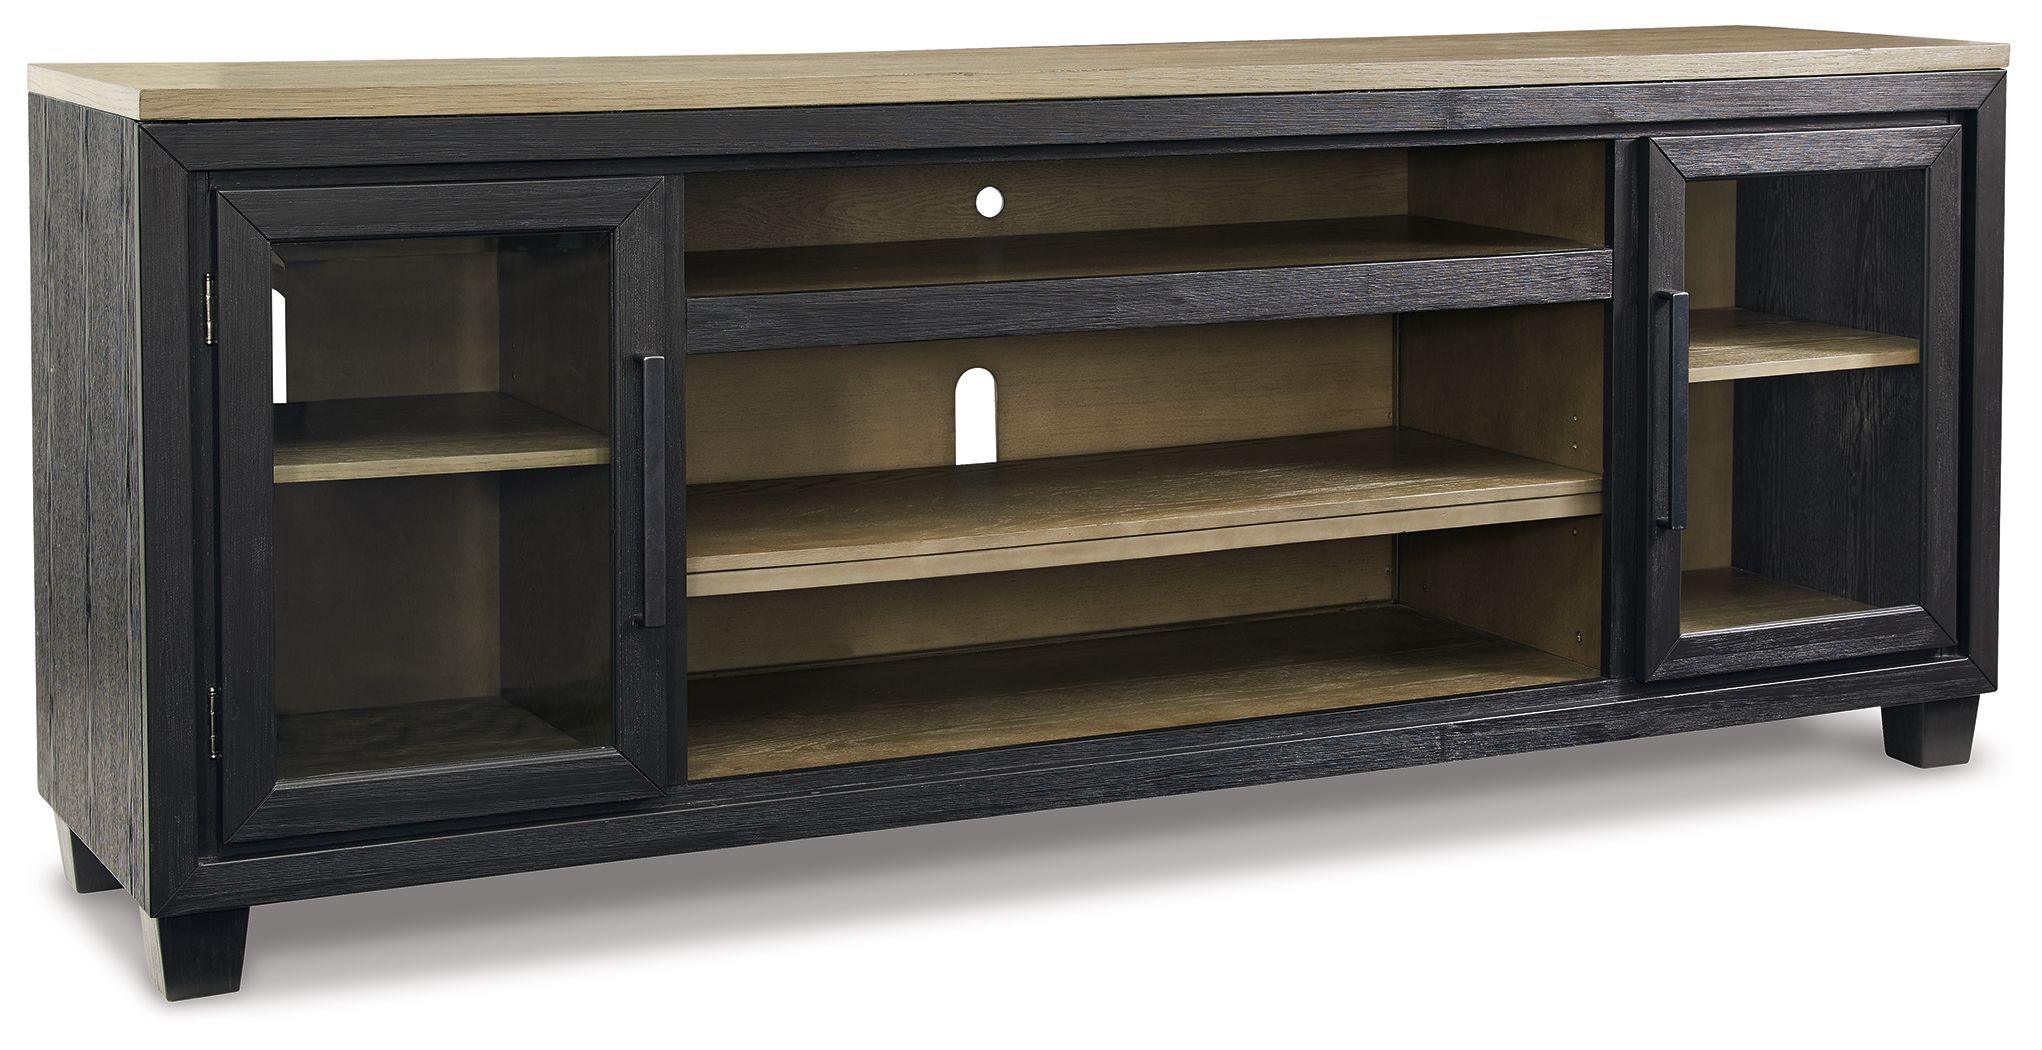 Signature Design by Ashley® - Foyland - Black / Brown - Xl TV Stand W/Fireplace Option - 5th Avenue Furniture